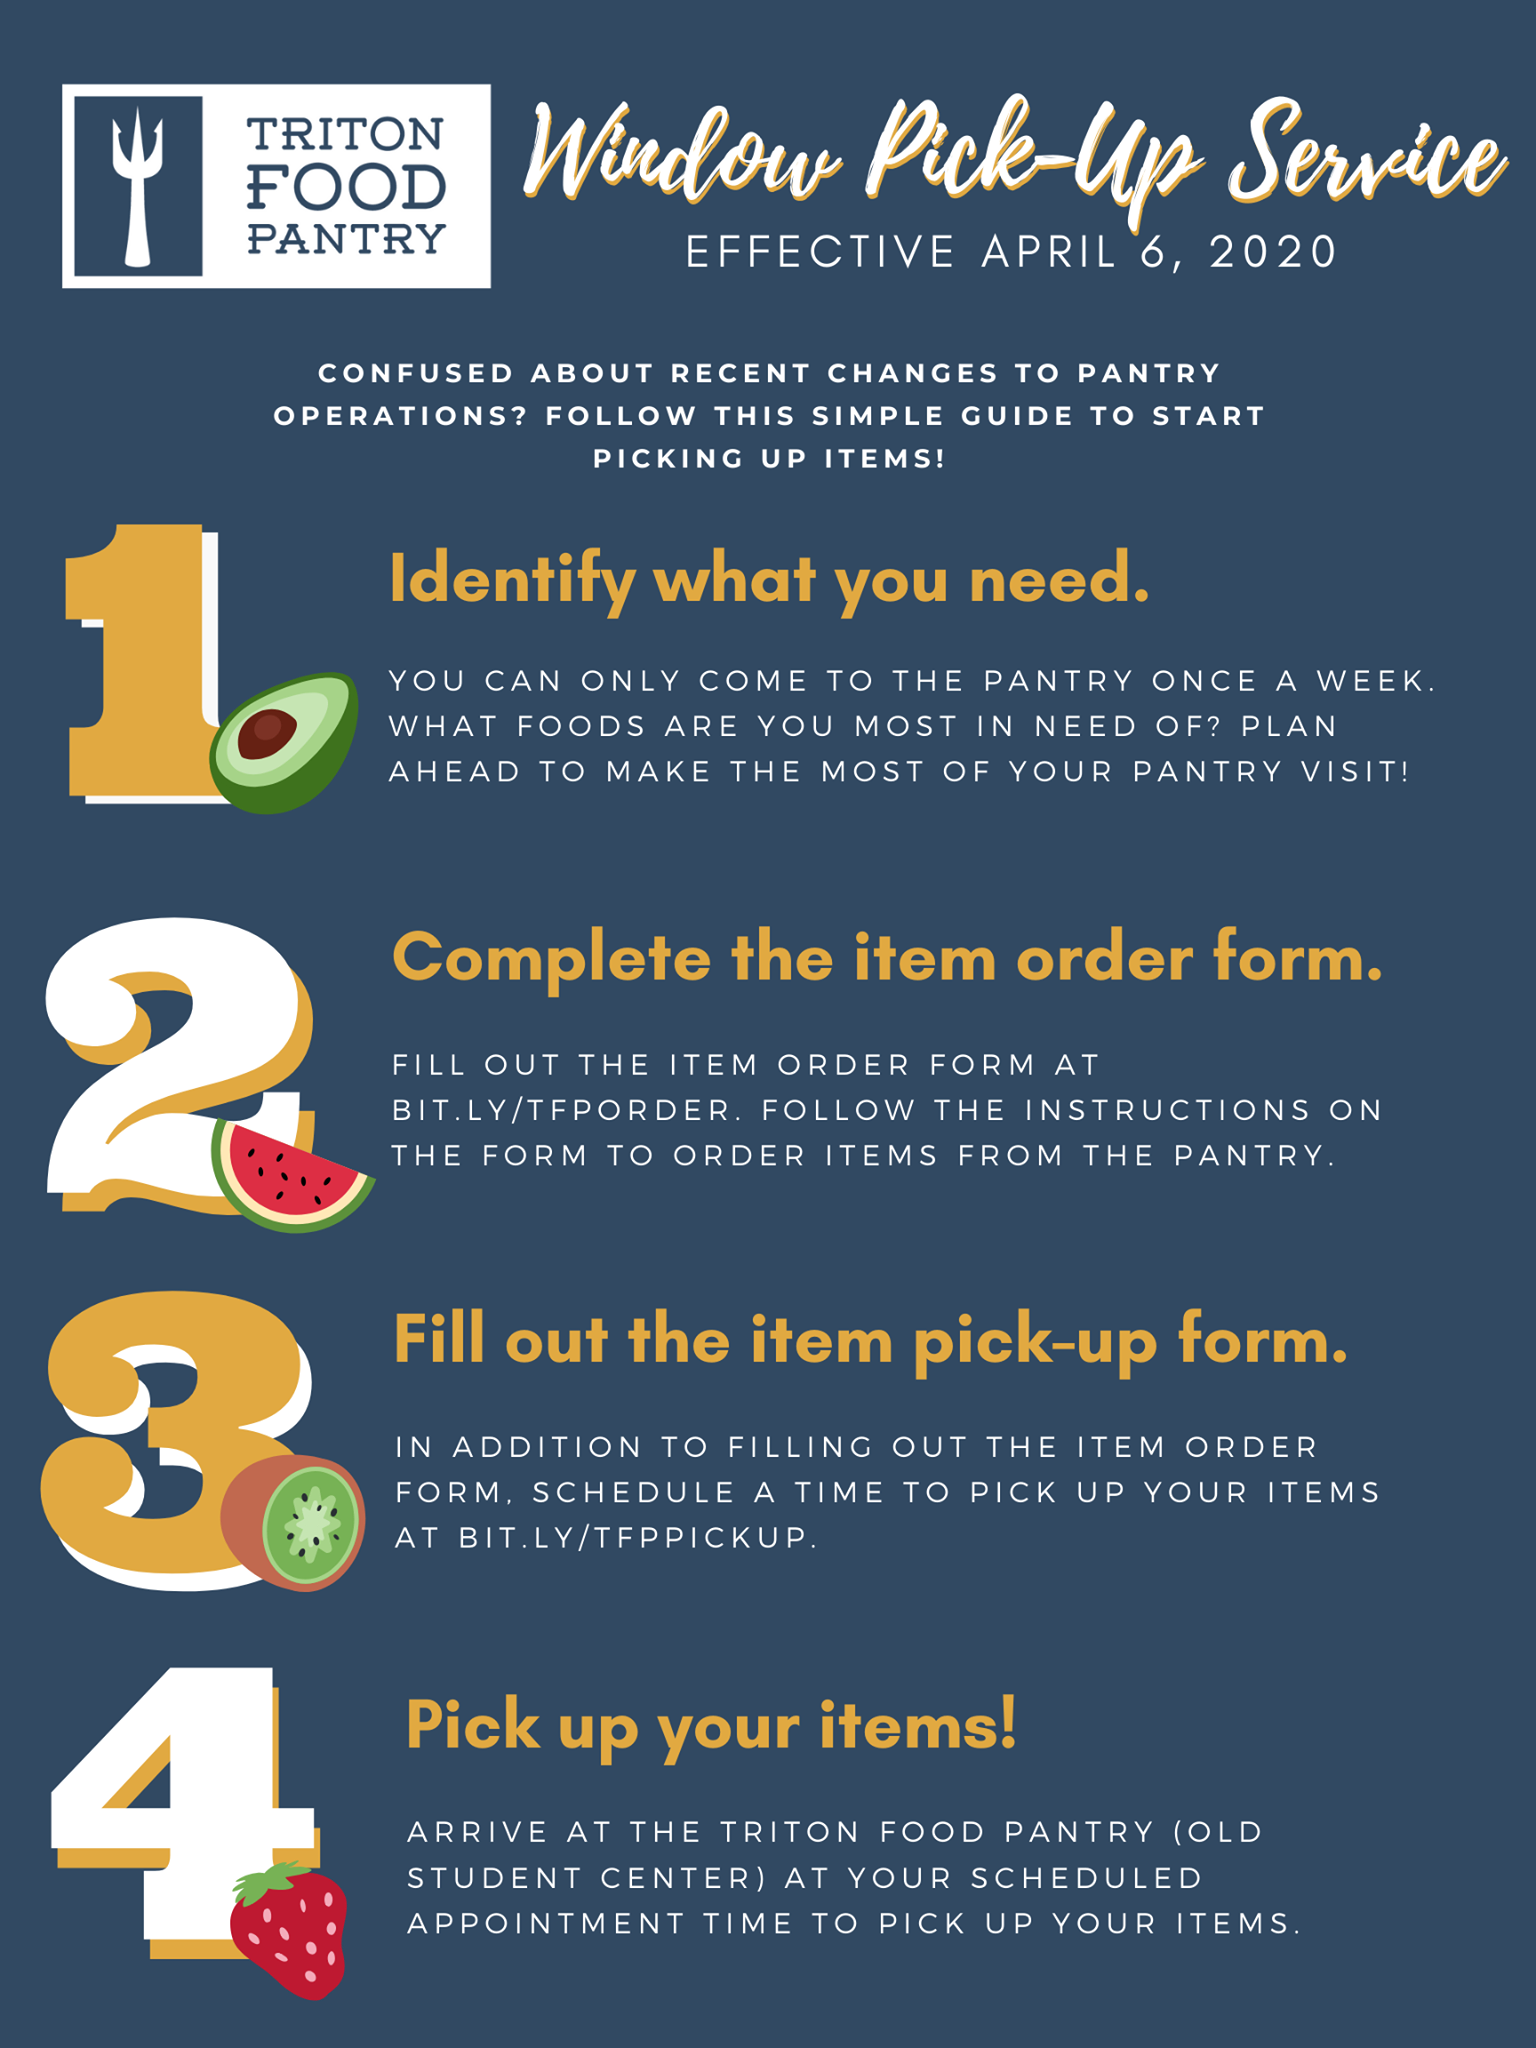 Triton Food Pantry Pick Up Service Instructions